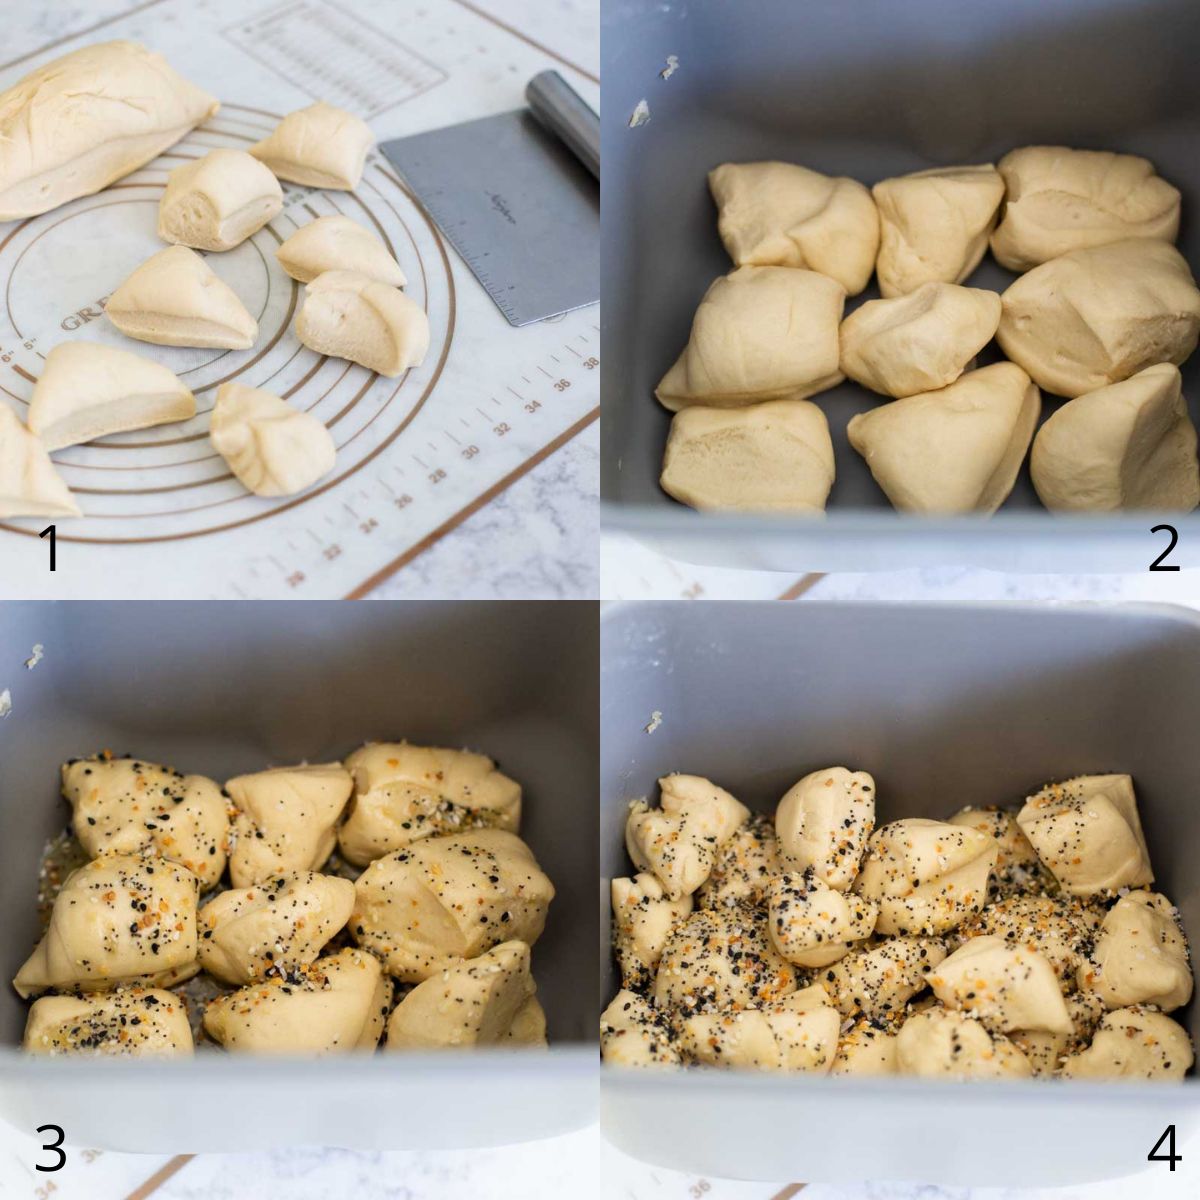 Step by step photos show how to assemble the dough into the bread machine pan for the everything bagel bread.